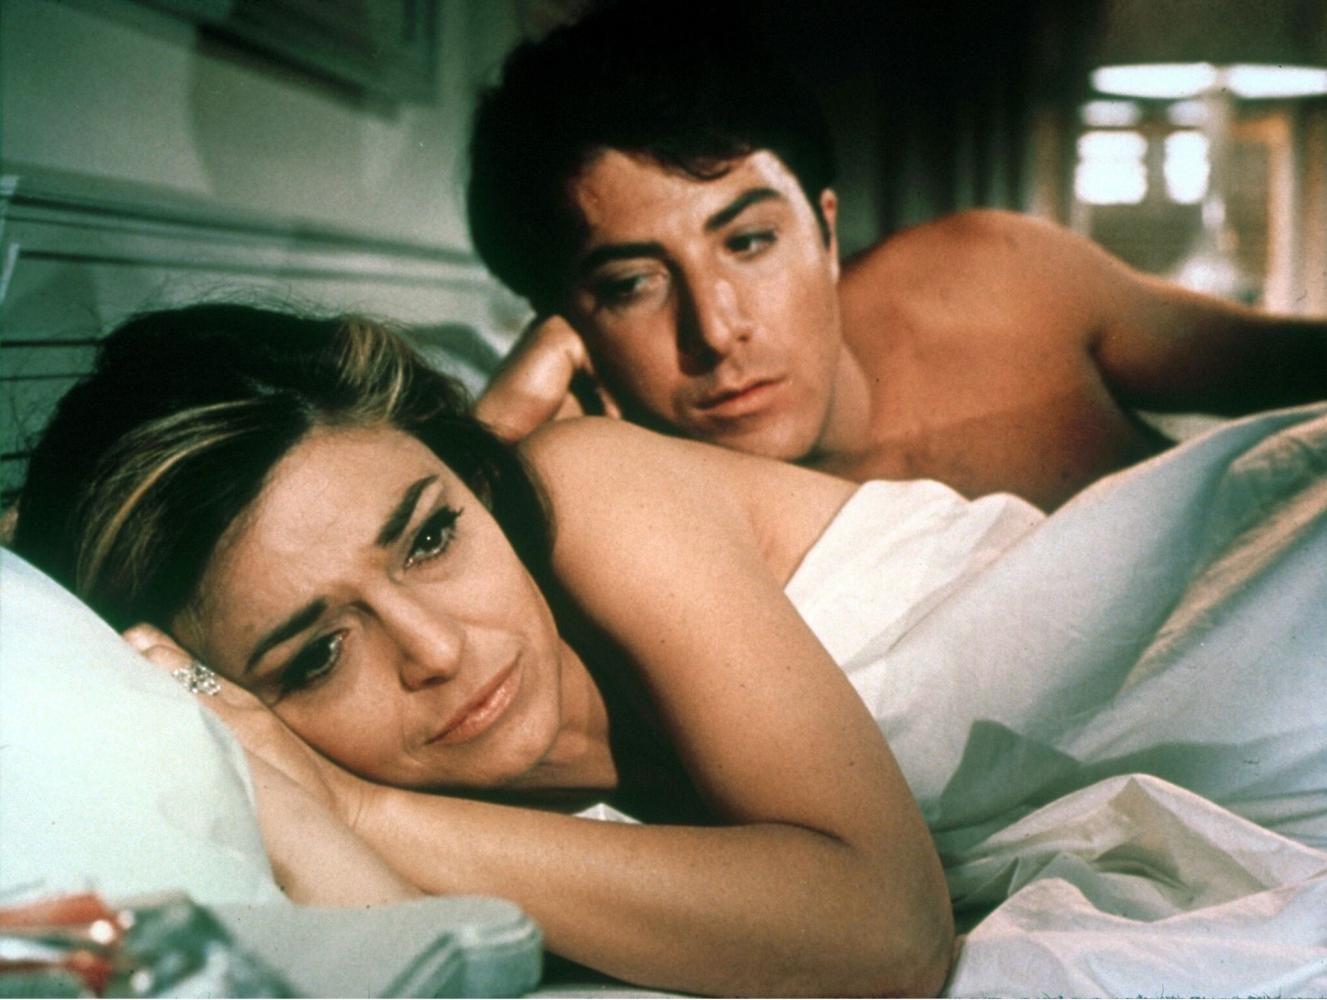 Anne+Bancroft+and+Dustin+Hoffman+star+in+the+classic+film+interpretation+of+Charles+Webb%E2%80%99s+novel%2C+%E2%80%9CThe+Graduate.%E2%80%9D+The+50th+anniversary+4K+restoration+of+the+film+premiered+on+Sunday.